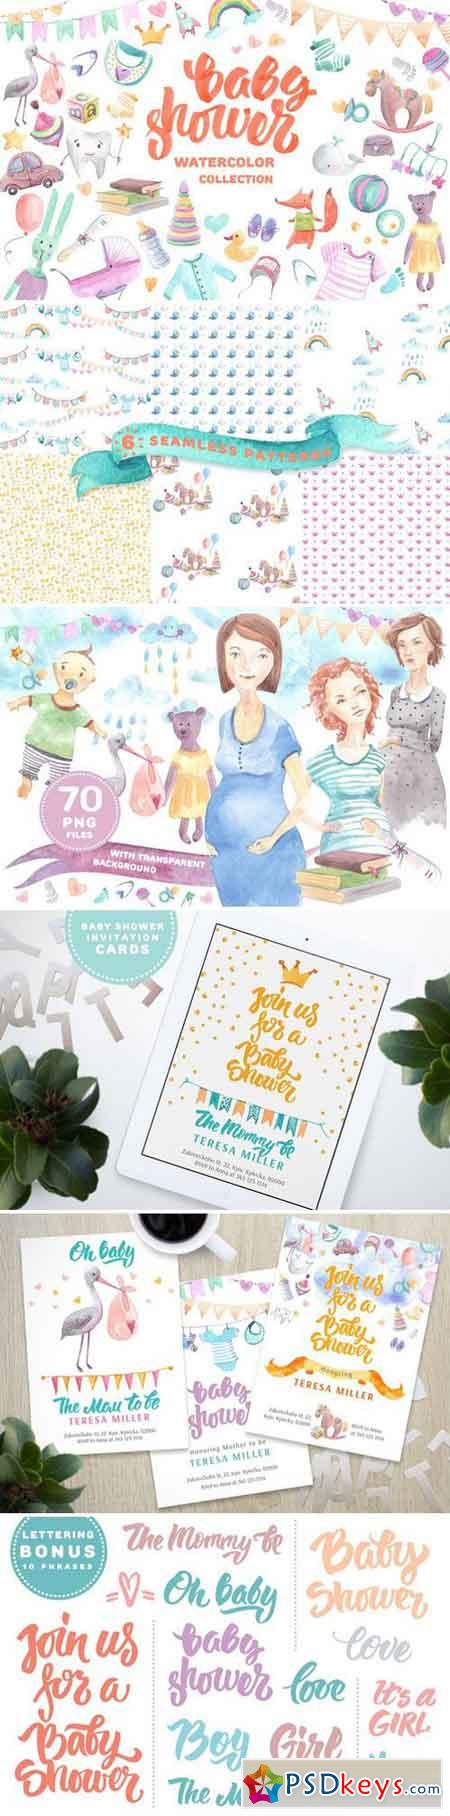 Baby shower watercolor collection 1872541